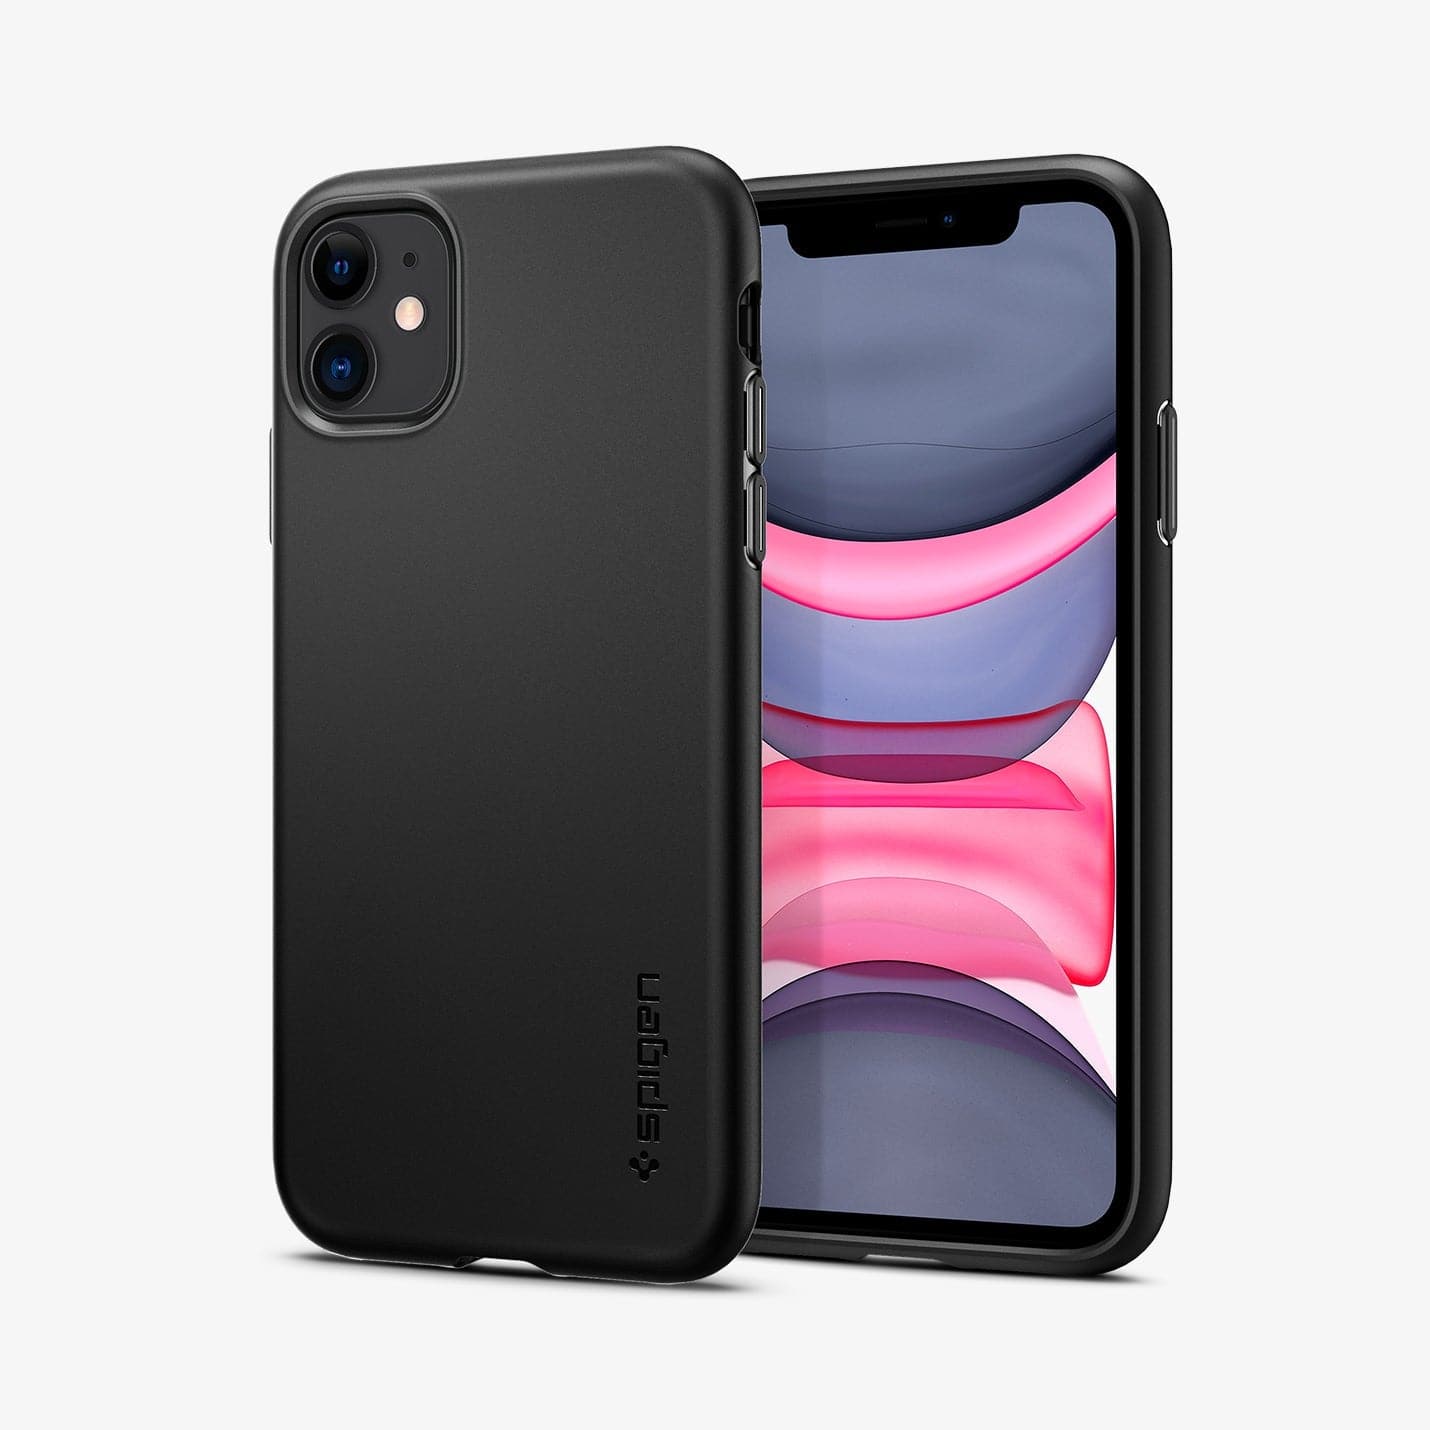 ACS02041 - iPhone 11 Case Thin Fit Pro in black showing the back and front